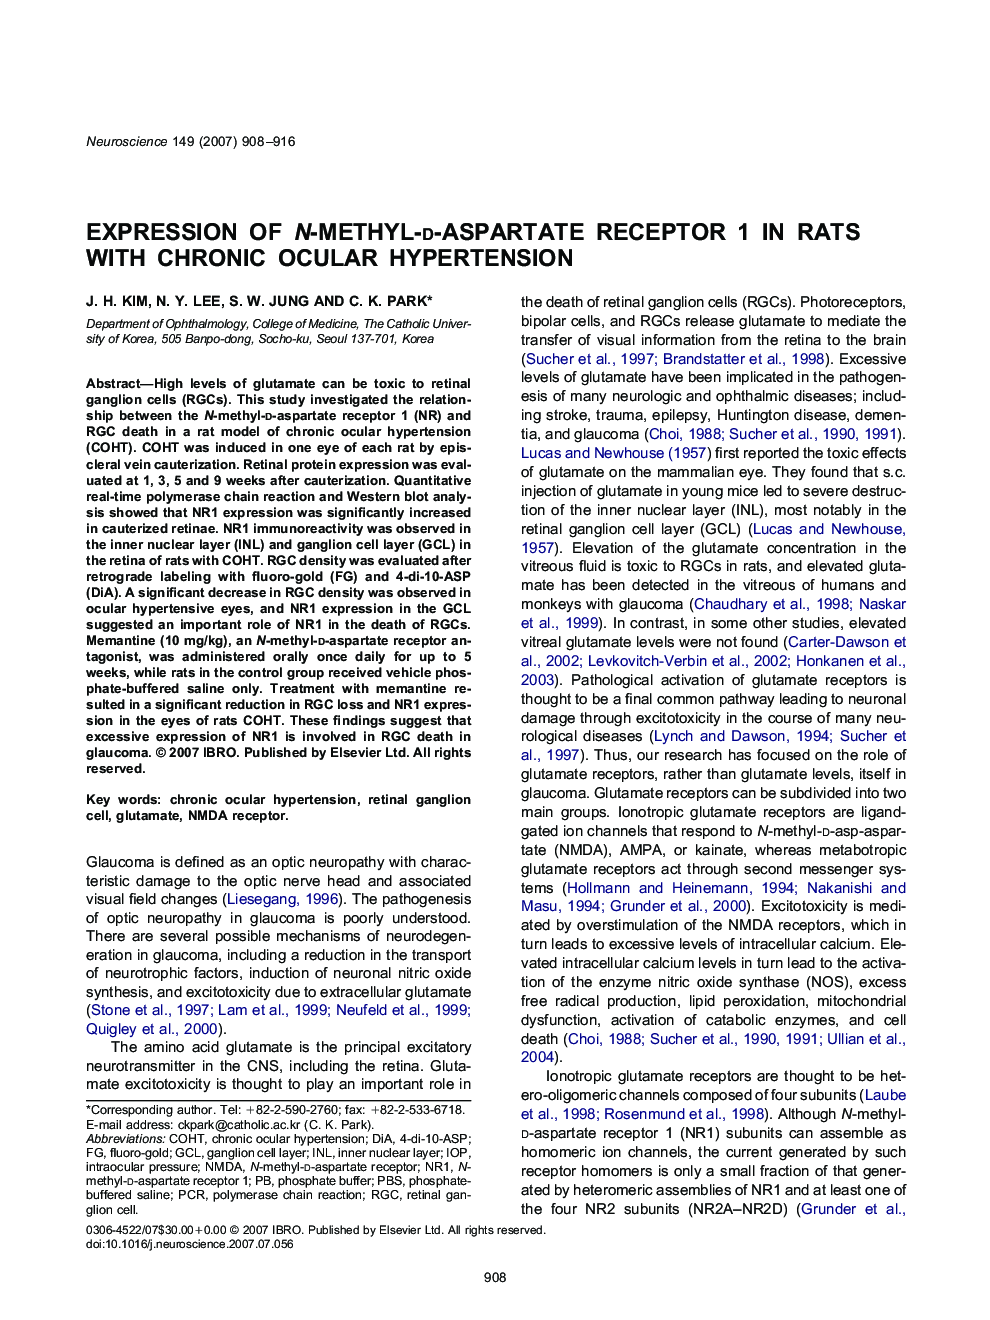 Expression of N-methyl-d-aspartate receptor 1 in rats with chronic ocular hypertension